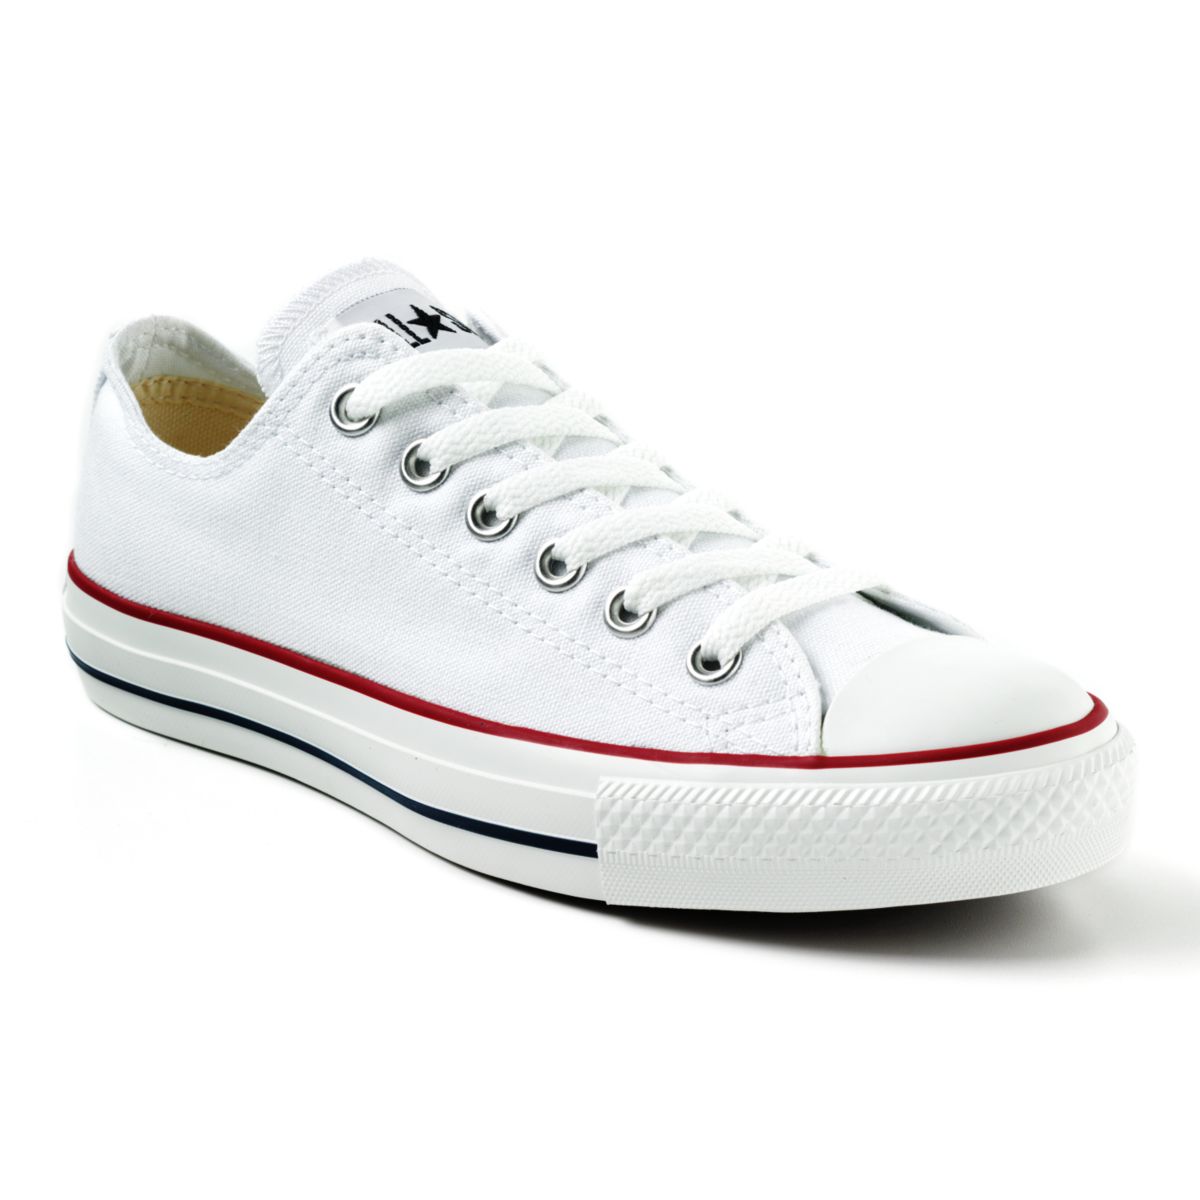 Adult Converse All Star Chuck Taylor Sneakers Converse